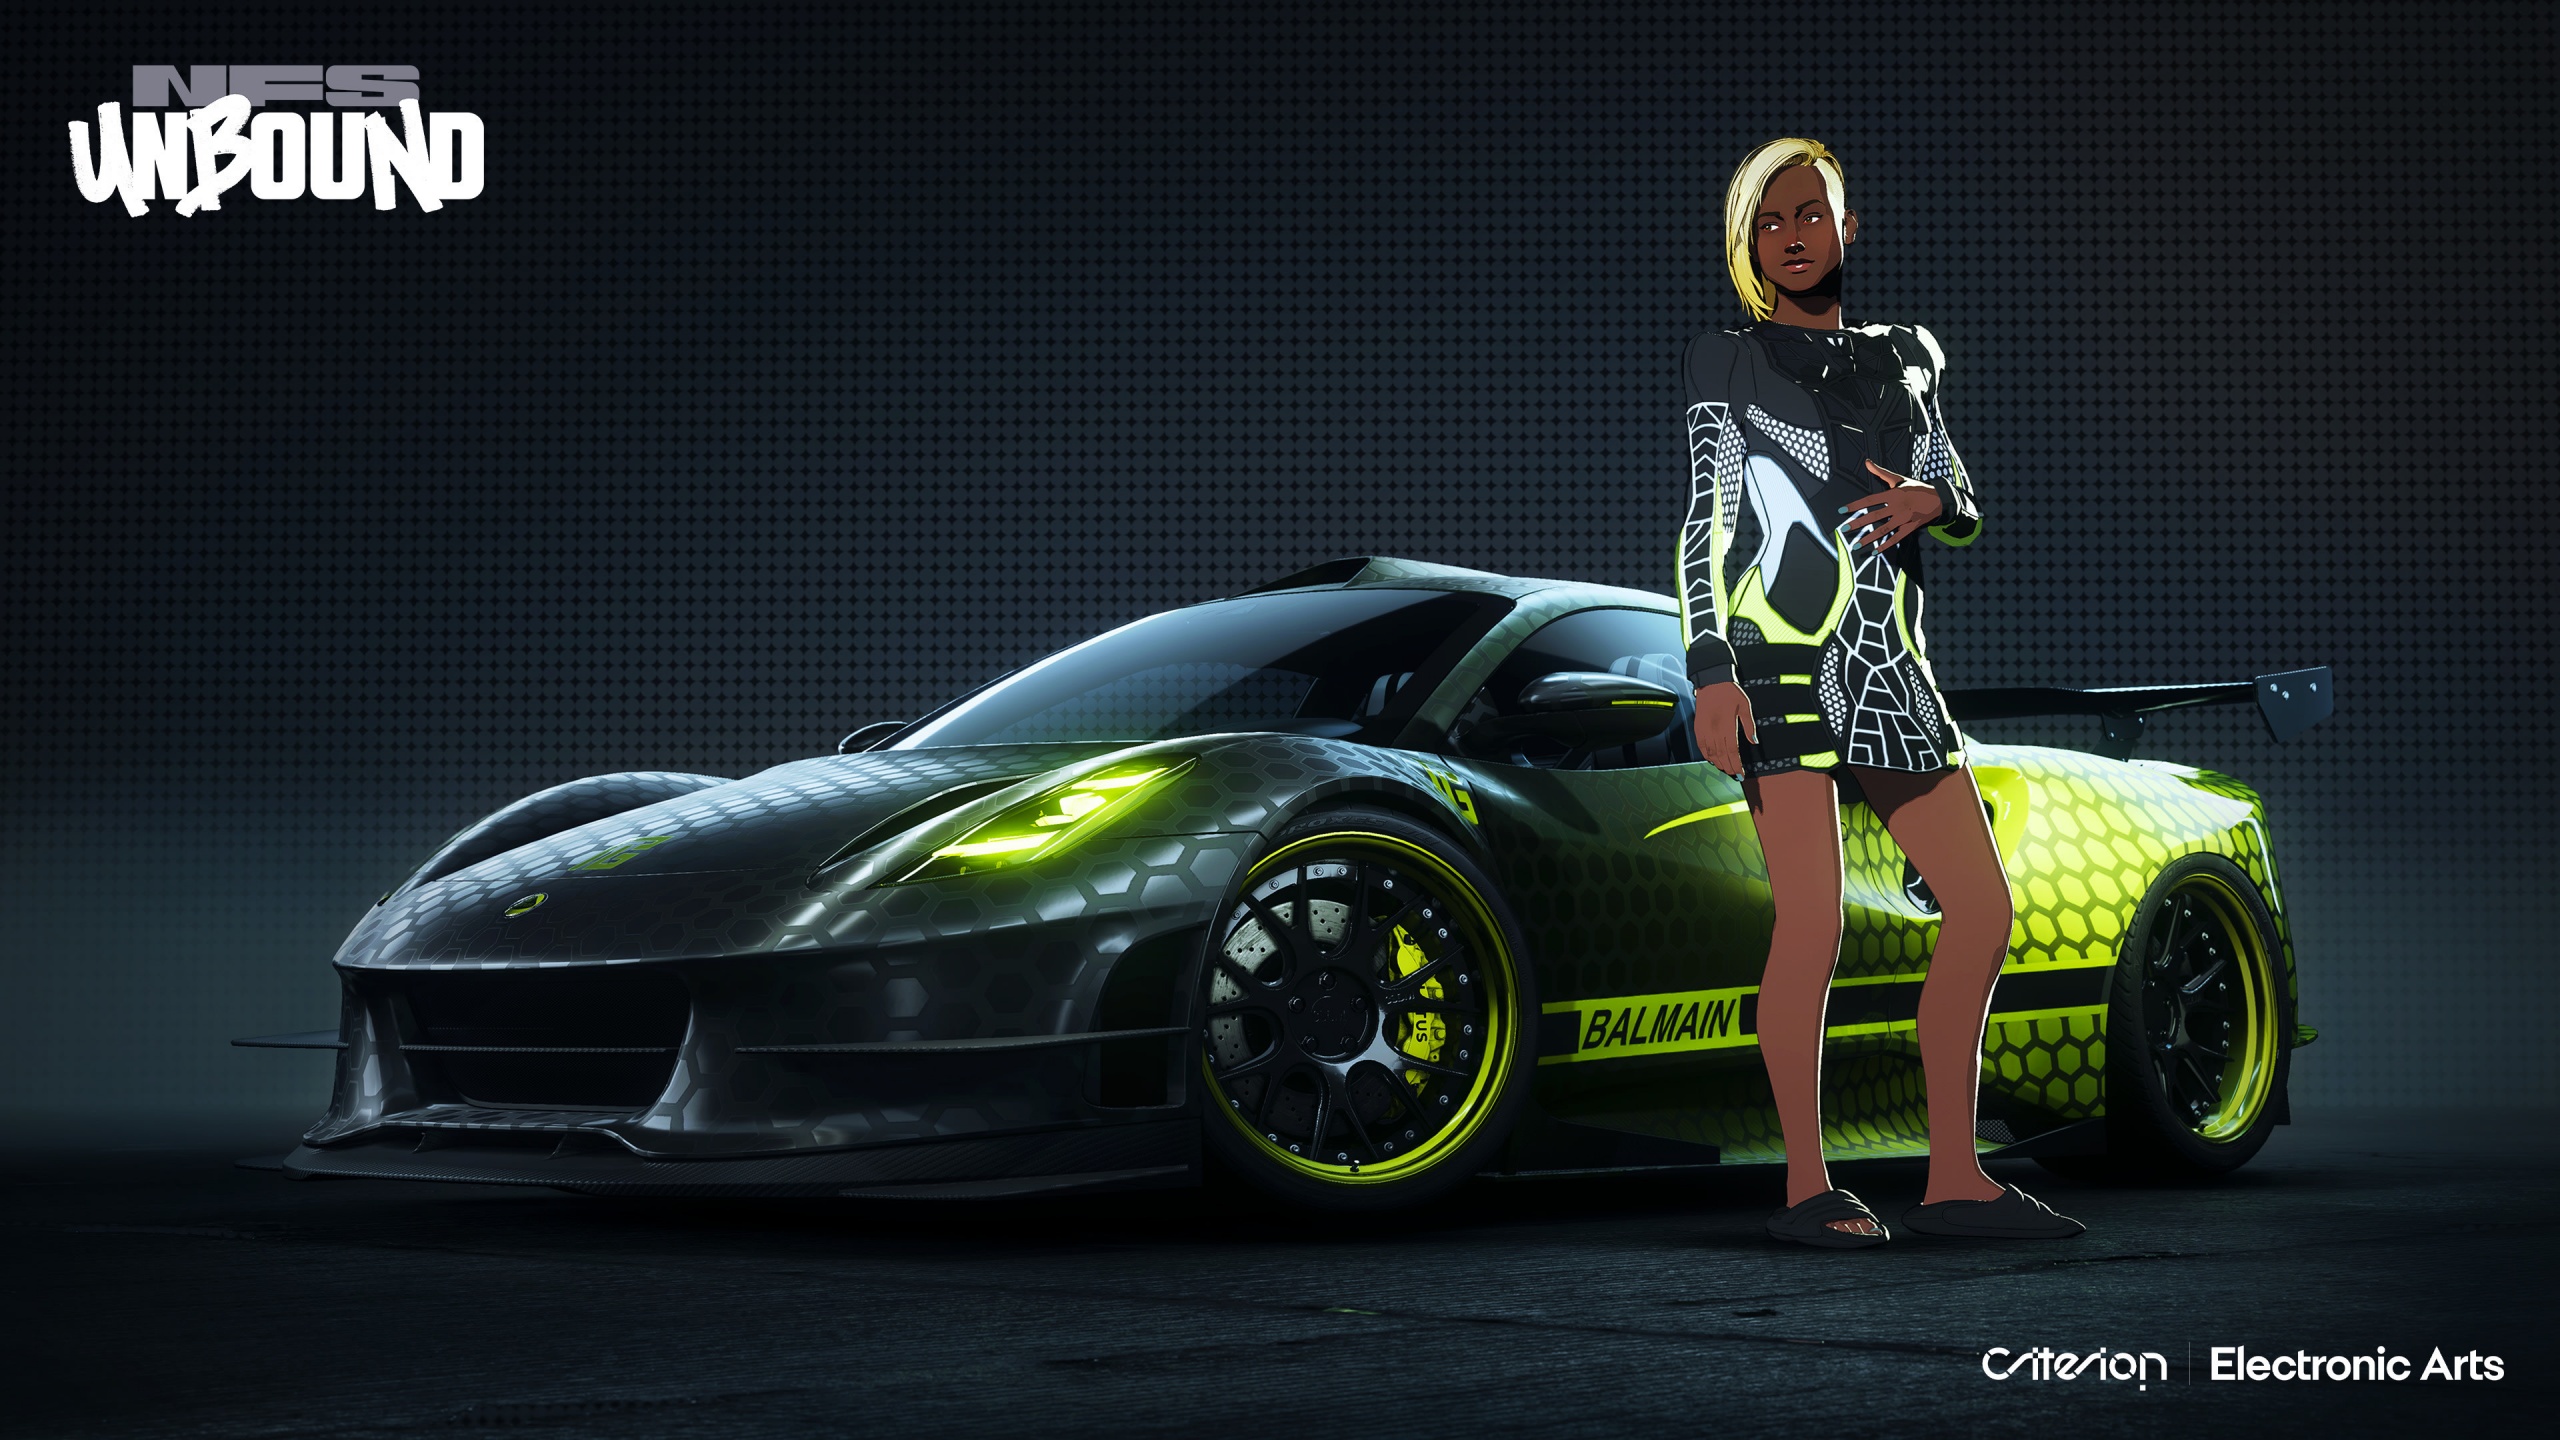 Need for Speed Unbound game car race 4K wallpaper download